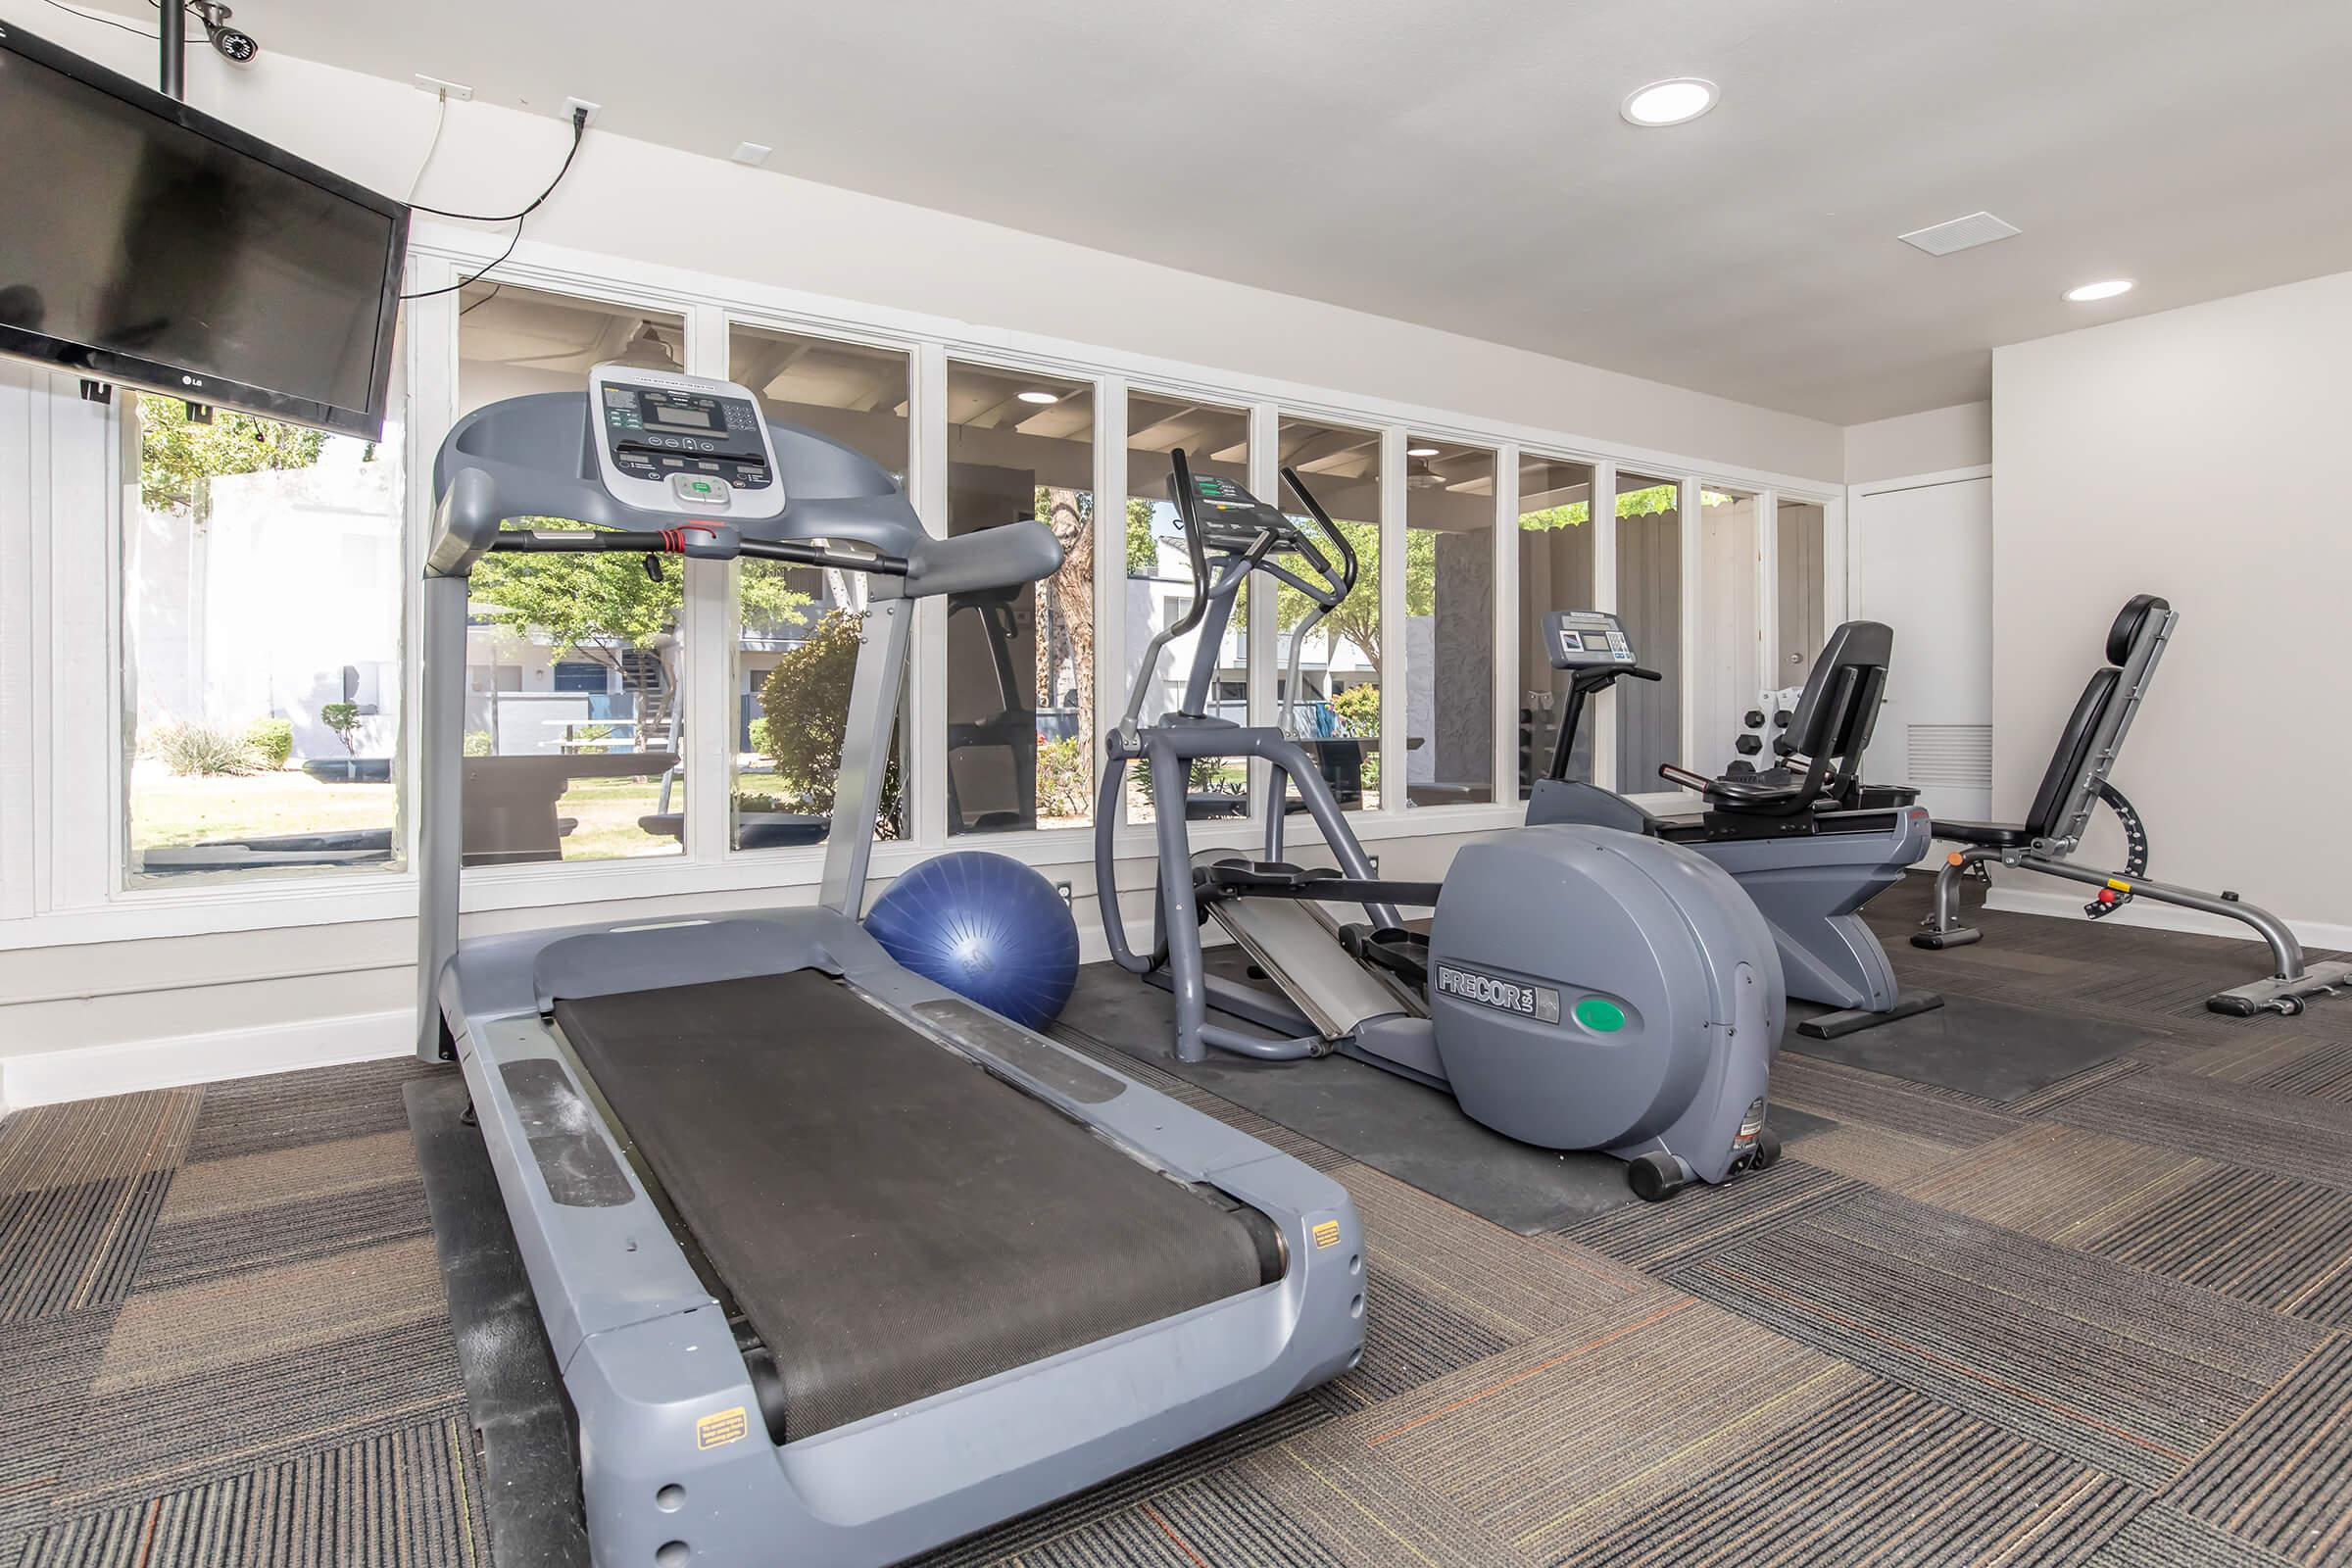 The fitness center at Rise on McClintock with workout equipment.